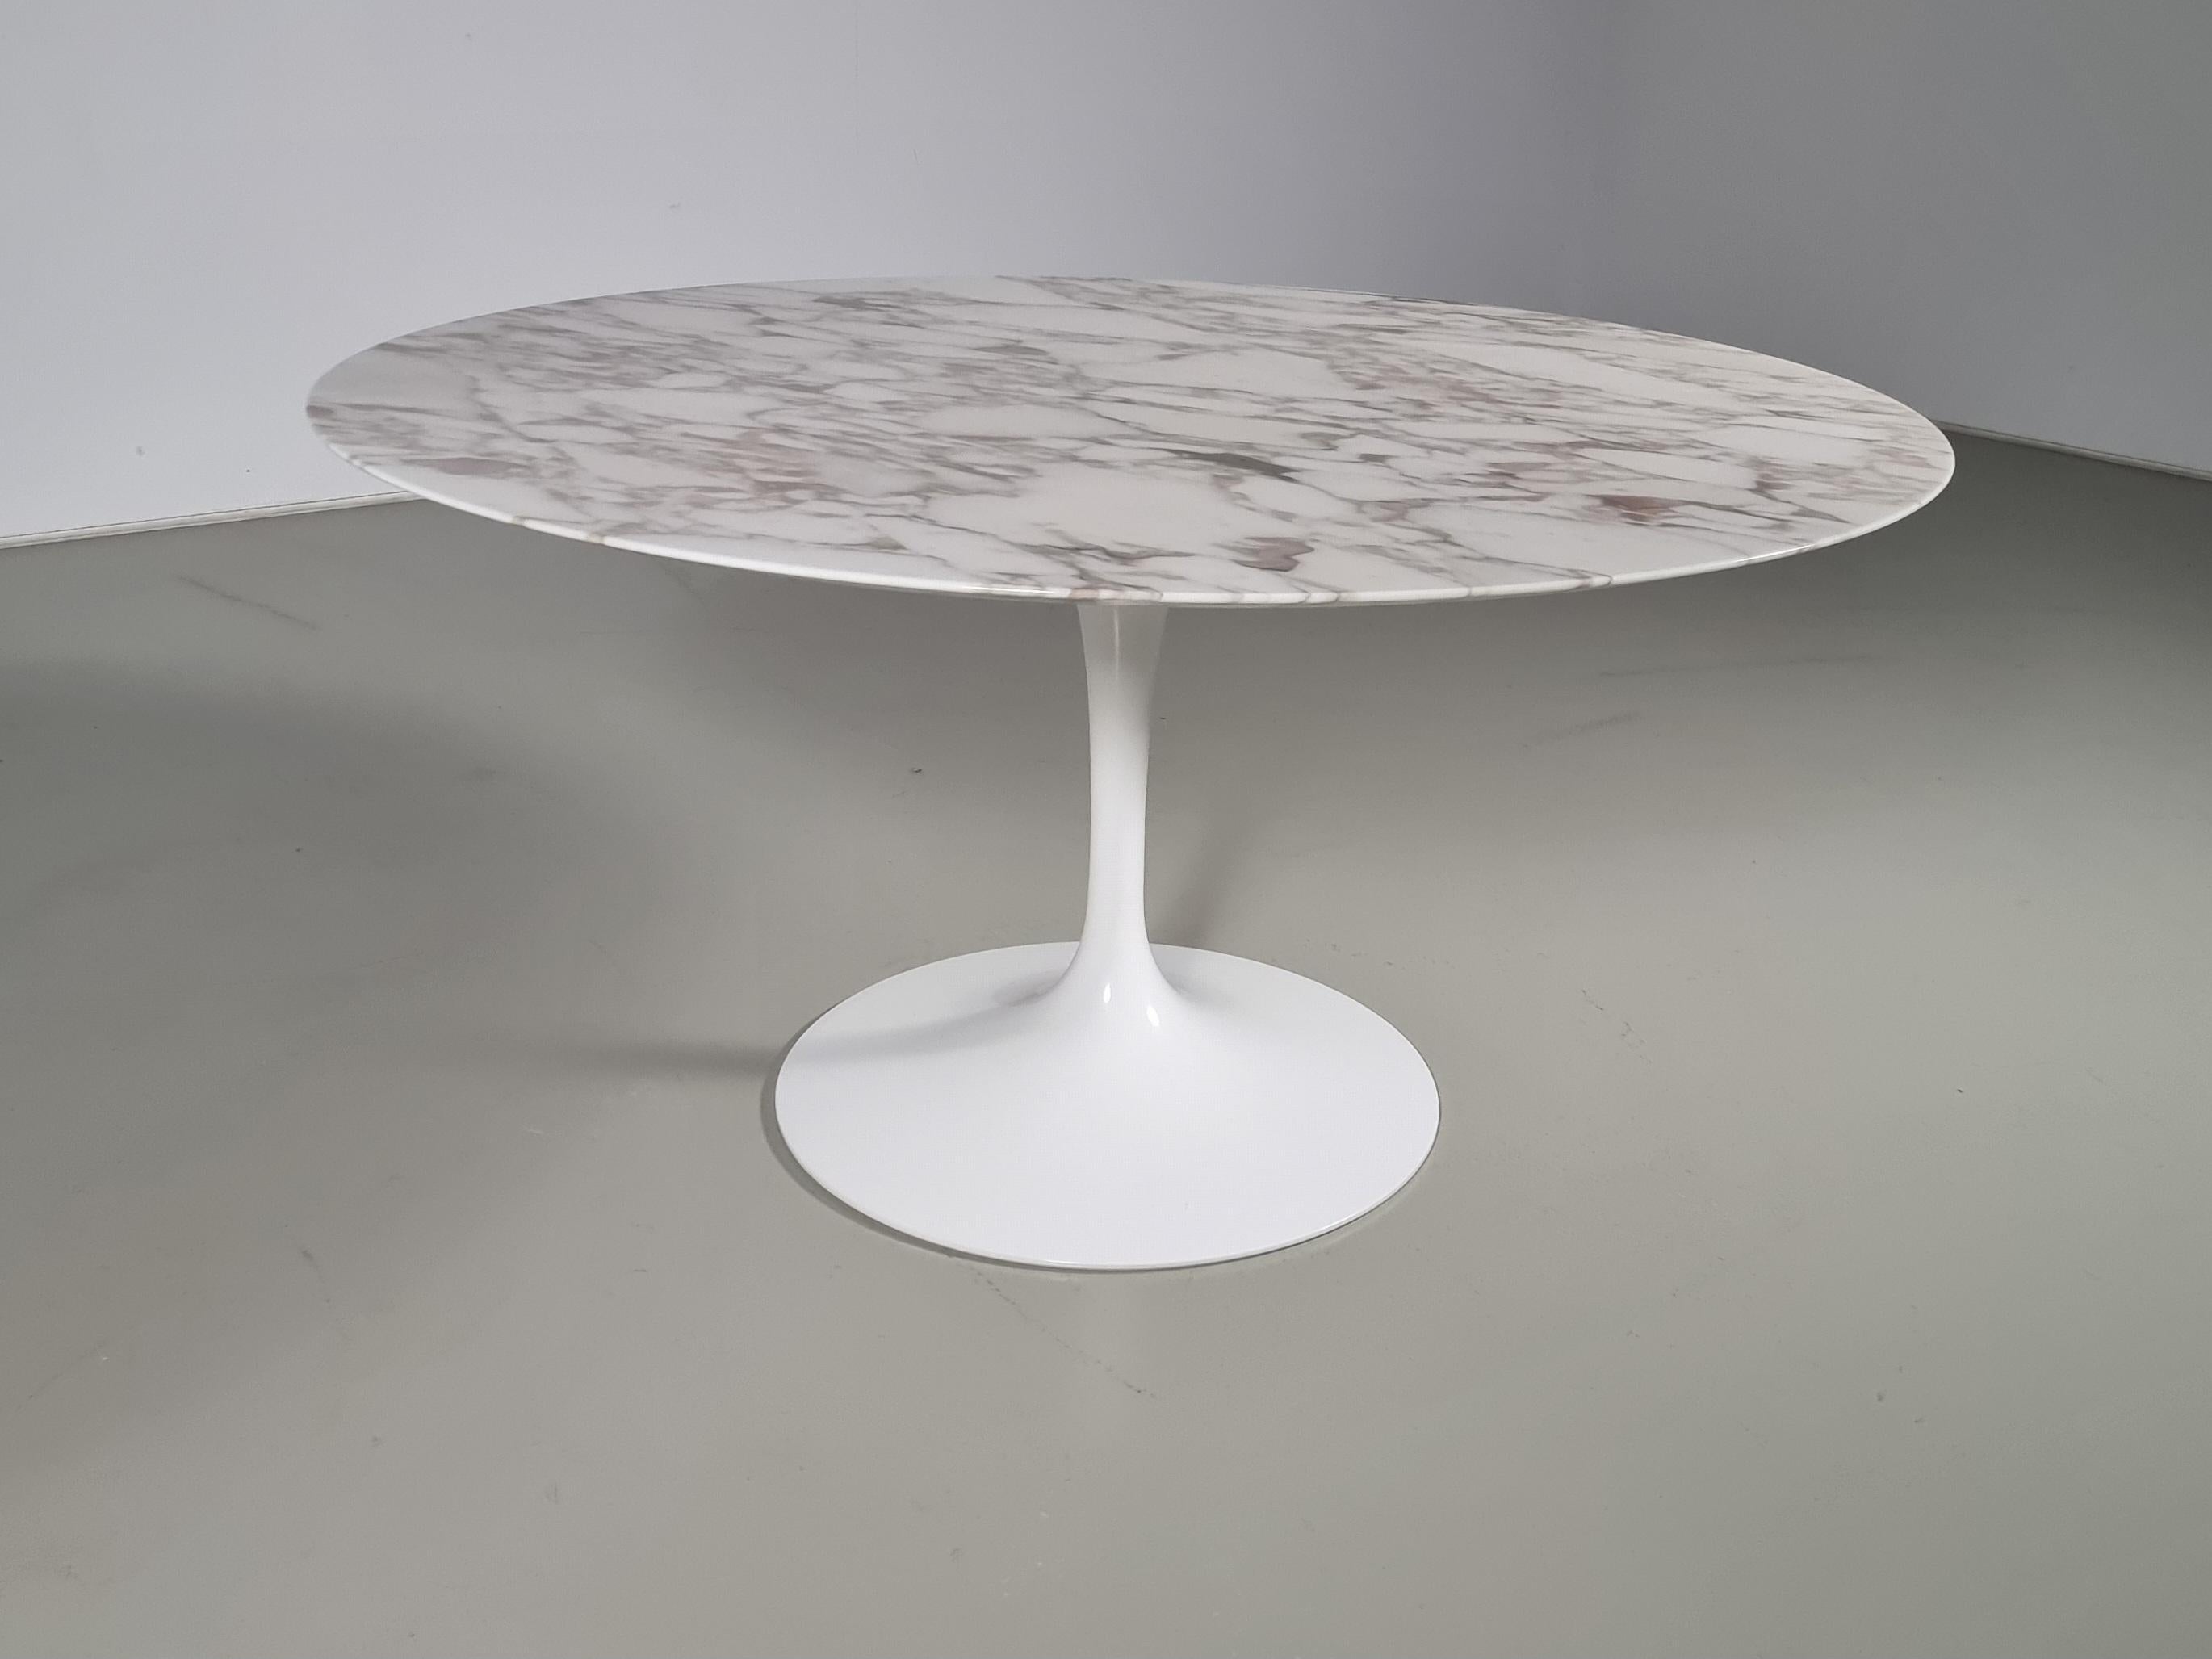 Tulip table, Eero Saarinen, Knoll International.

A beautiful classic table made of callacatta d'oro marble. On a cast-aluminum tulip pedestal base. The marble is in beautiful condition and has de most amazing color. The marble features dramatic